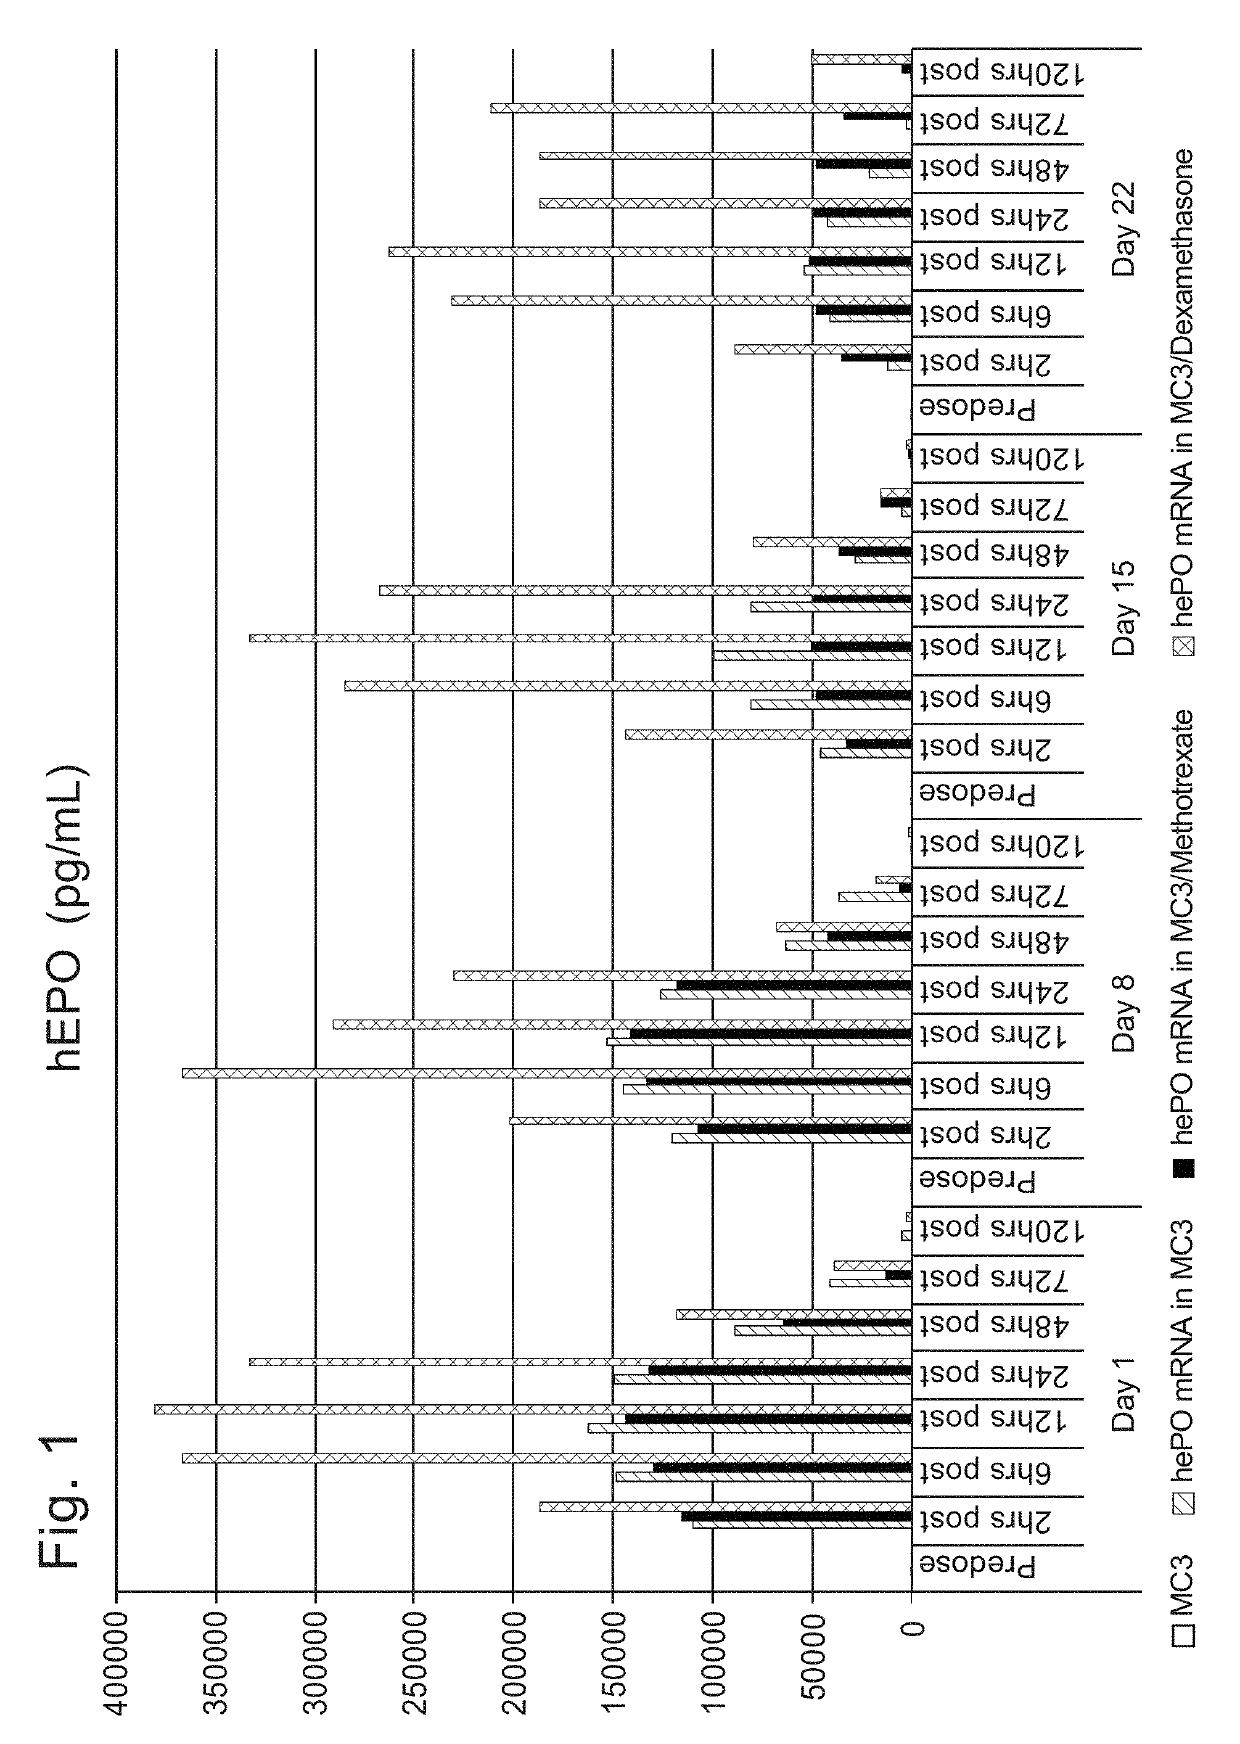 Compounds and compositions for intracellular delivery of therapeutic agents